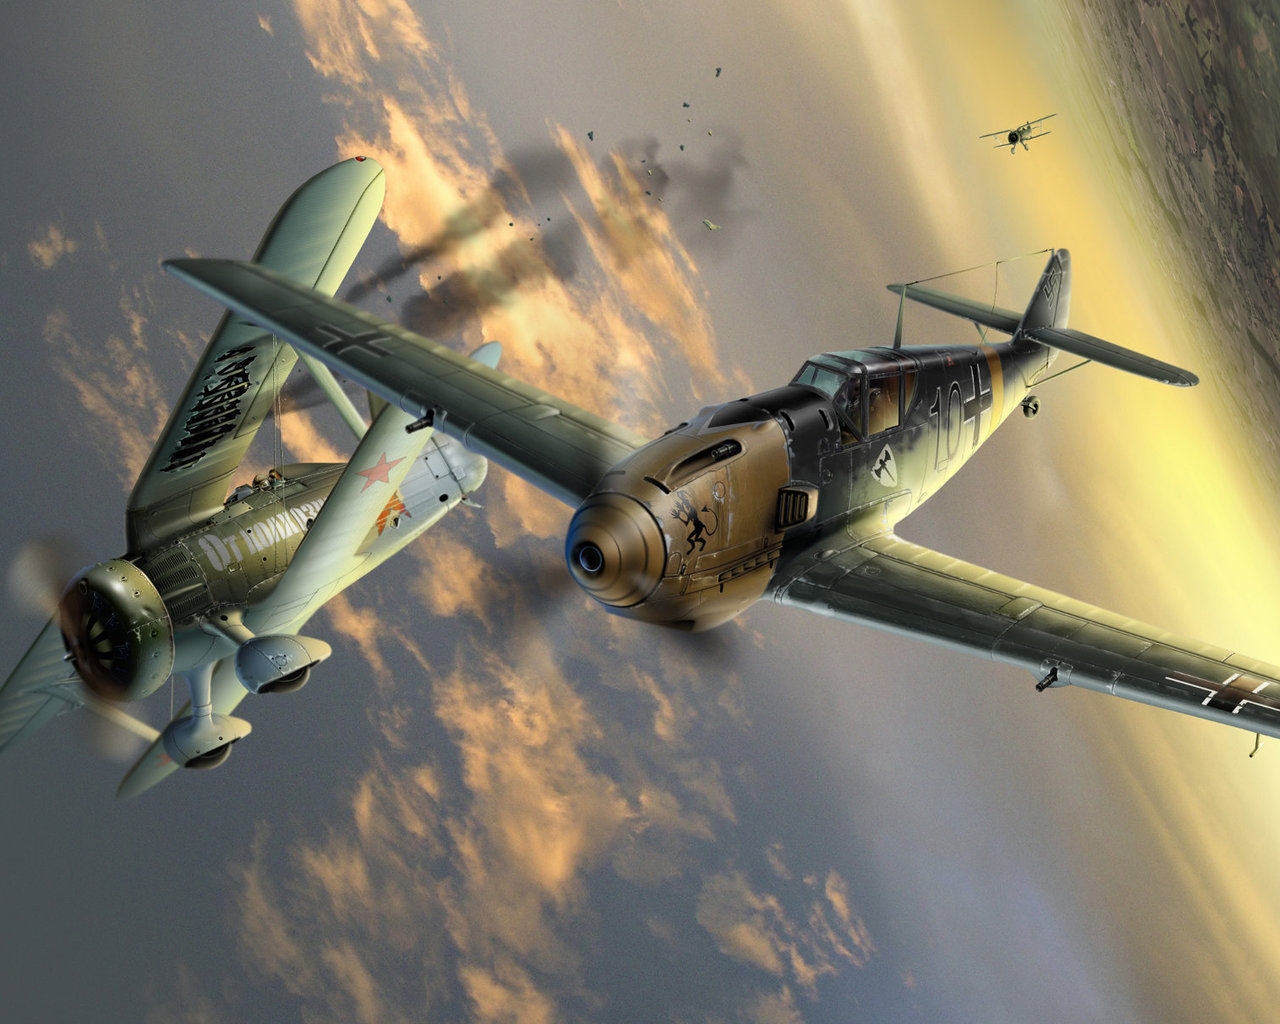 Me 109 War II Fighter Aircraft for 1280 x 1024 resolution